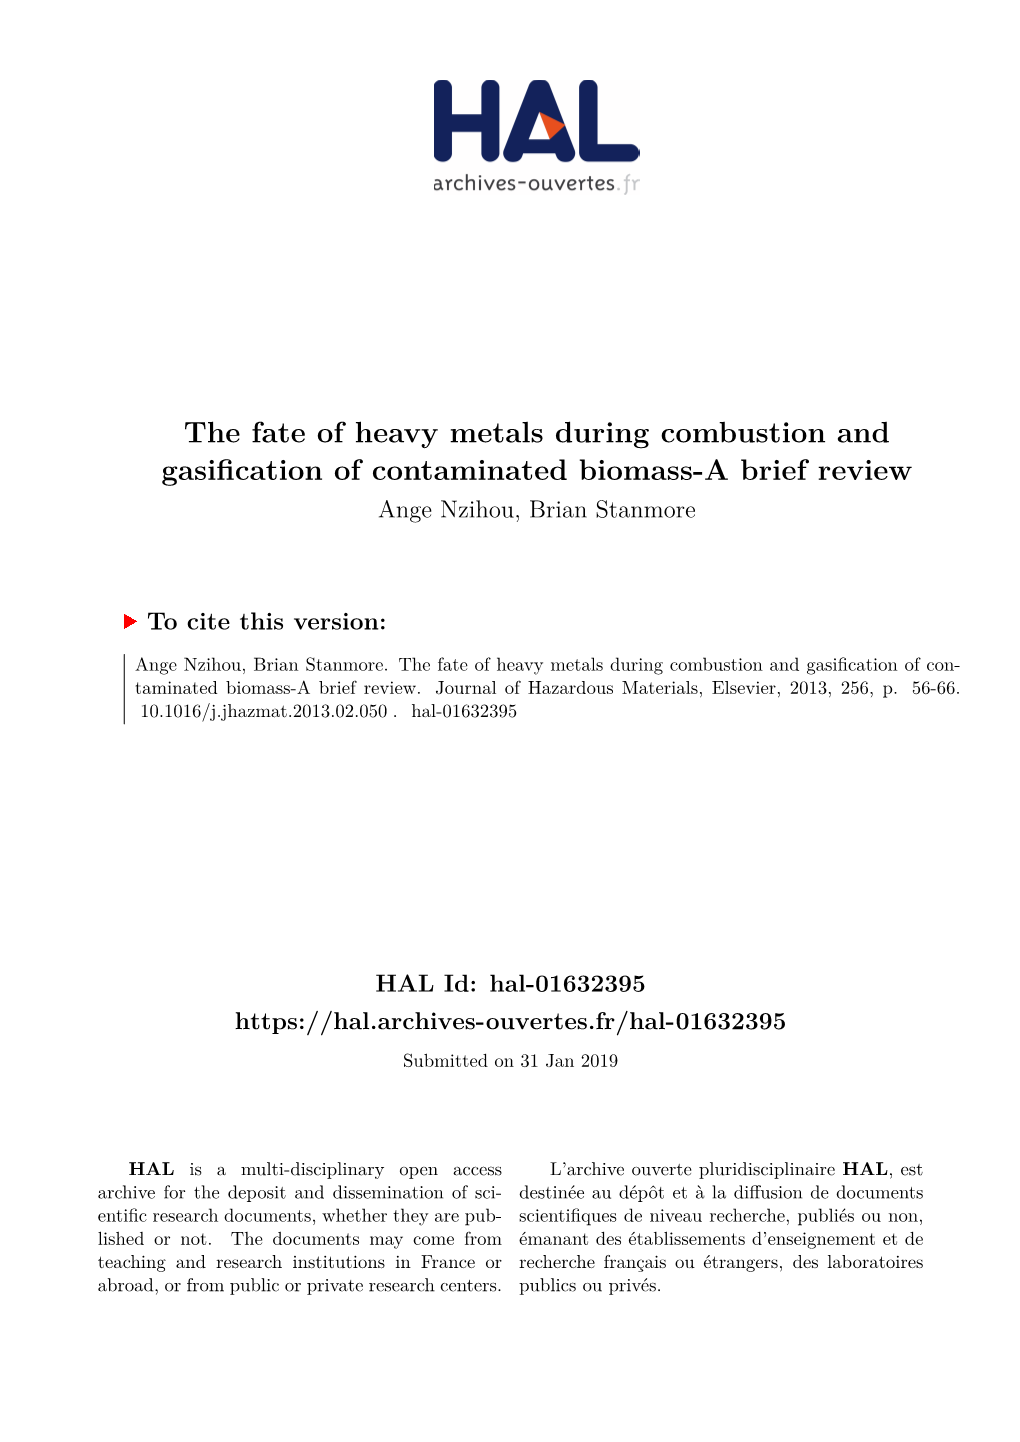 The Fate of Heavy Metals During Combustion and Gasification of Contaminated Biomass-A Brief Review Ange Nzihou, Brian Stanmore